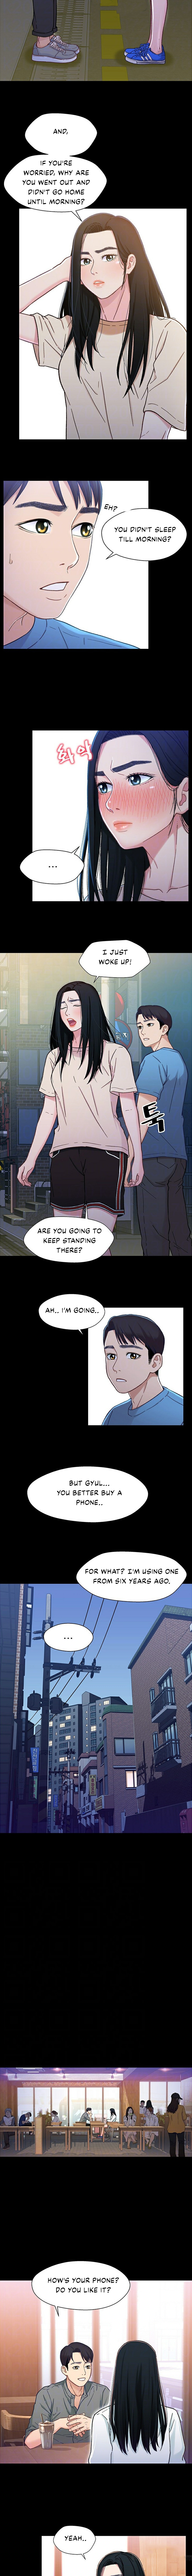 Siblings (Brother and Sister) - Chapter 8 Page 4